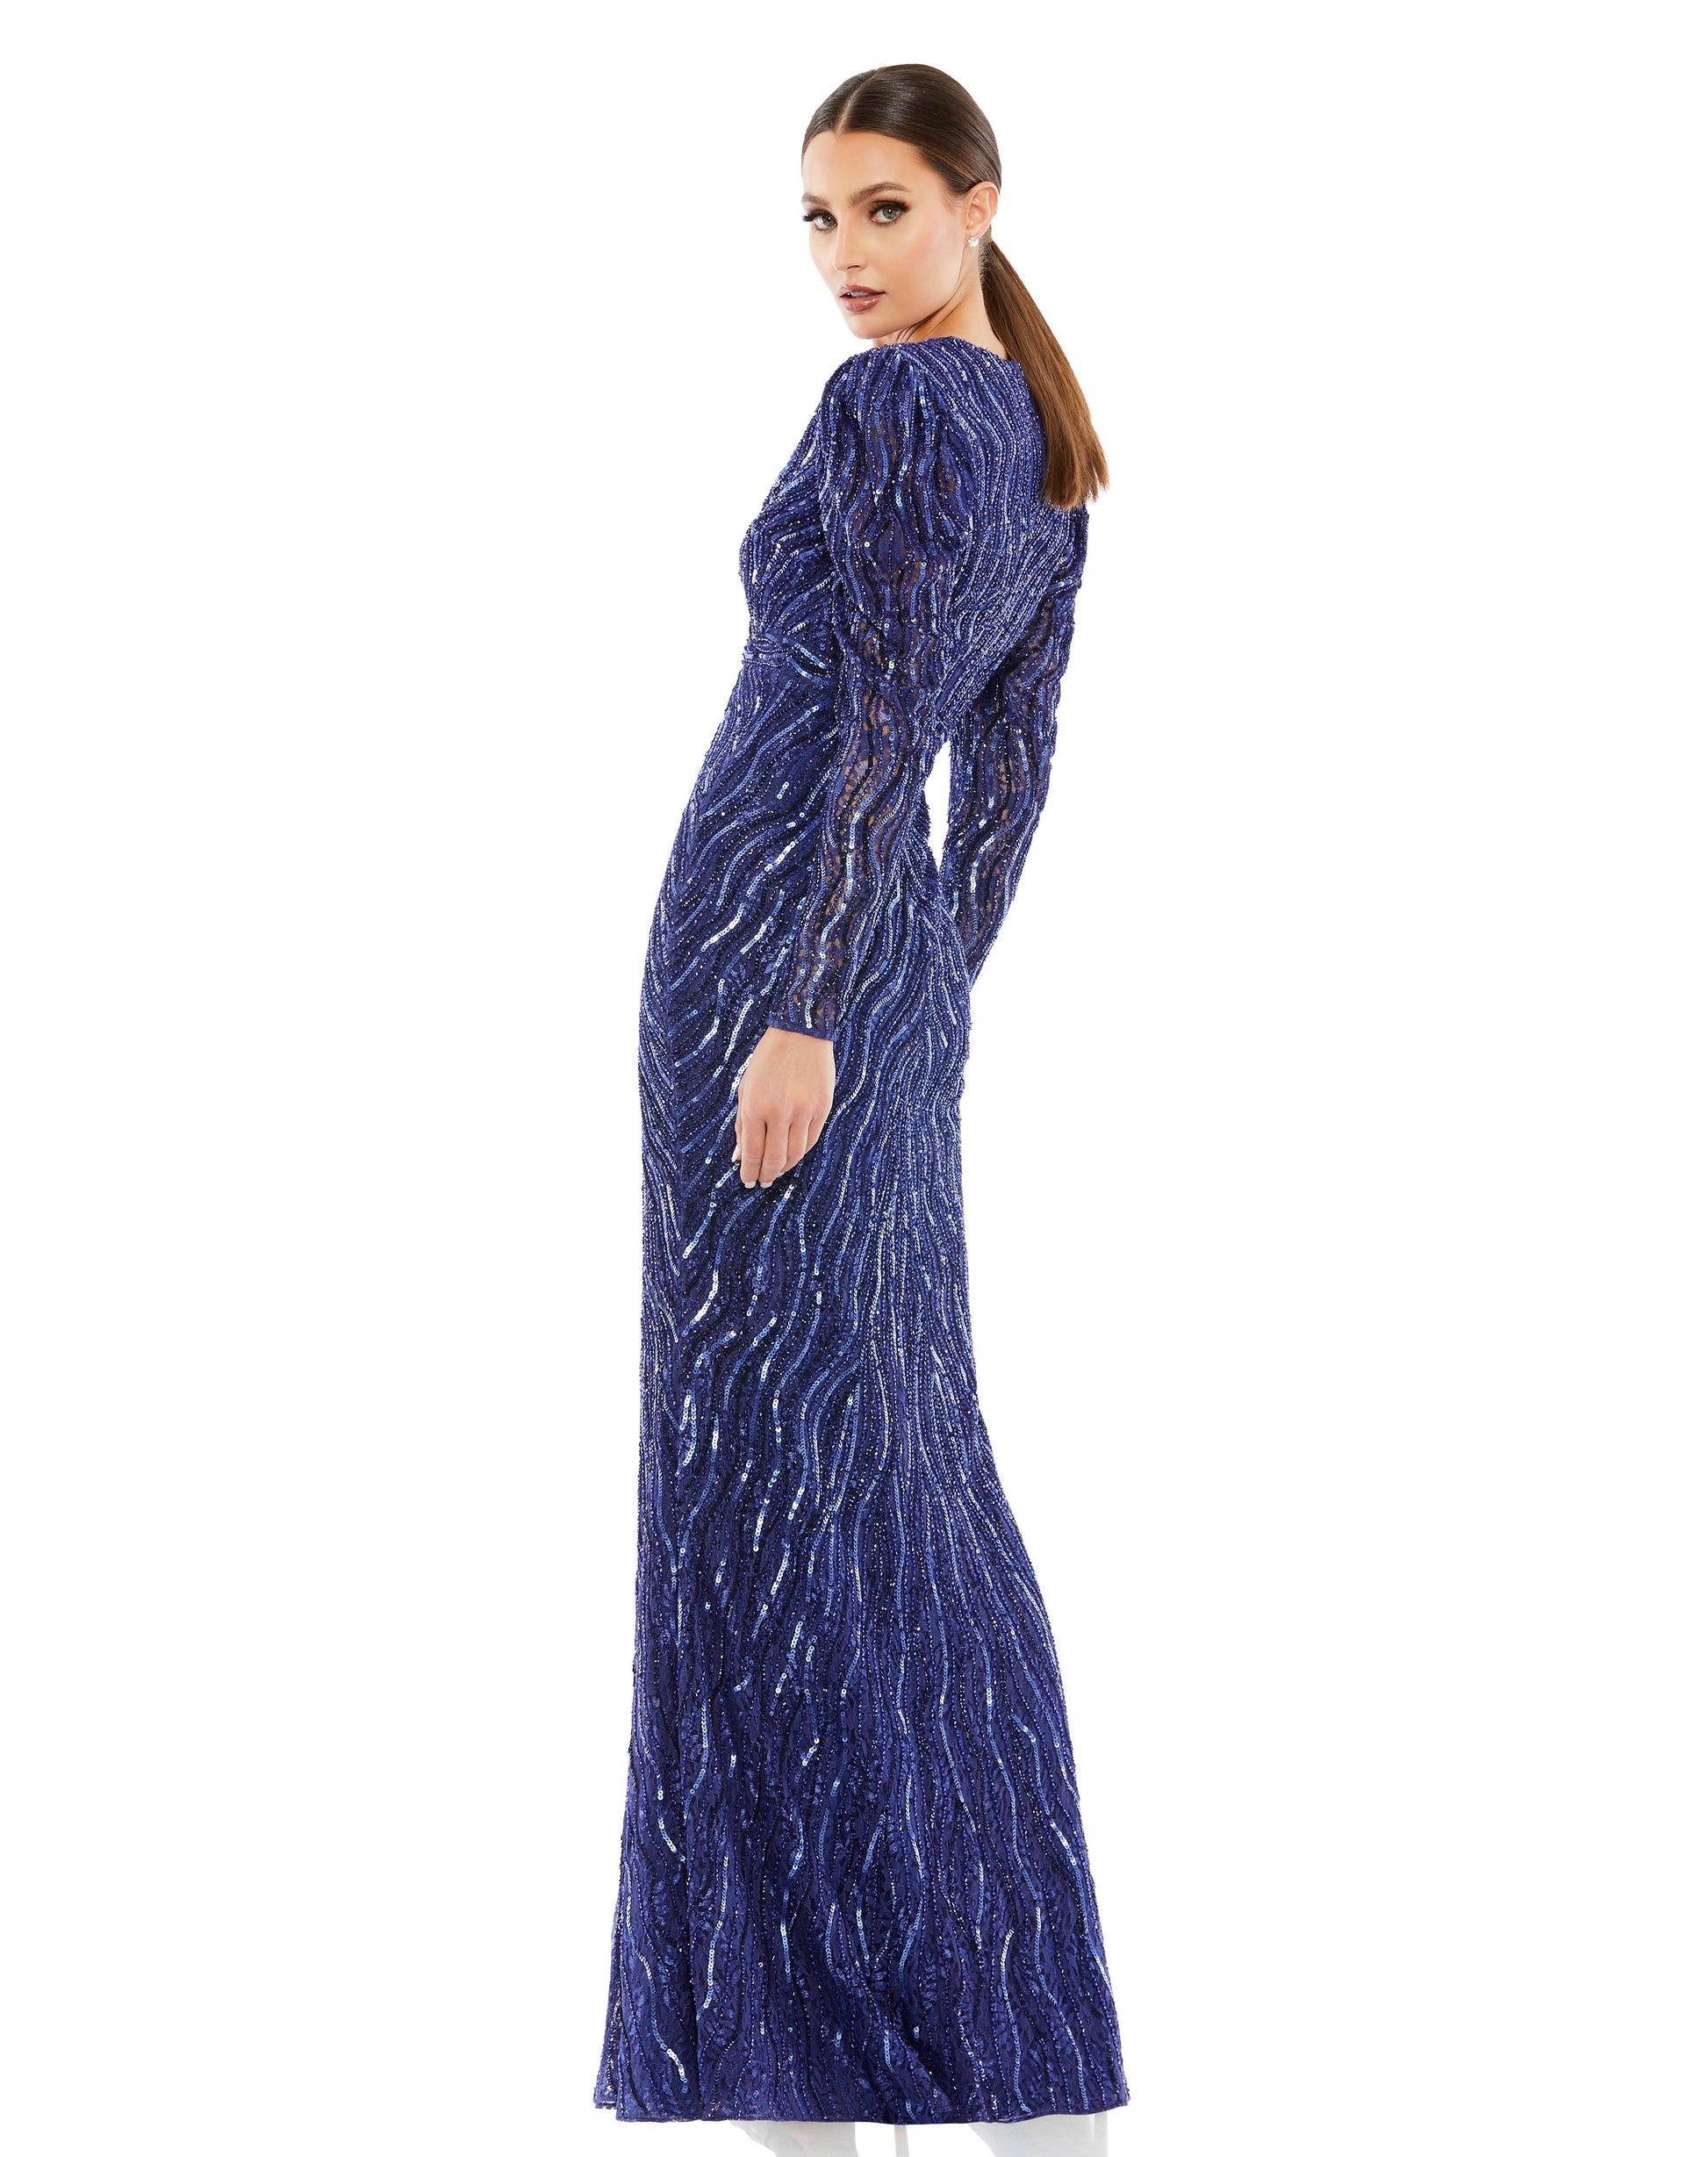 Elegant puff sleeve trumpet gown adorned with sequins and beading throughout. Plunging v-neckline features a semi-sheer mesh inset, and an embellished waistband defines the waist. Mac Duggal Fully Lined Back Zipper 100% Polyester Long Sleeve Full Length V